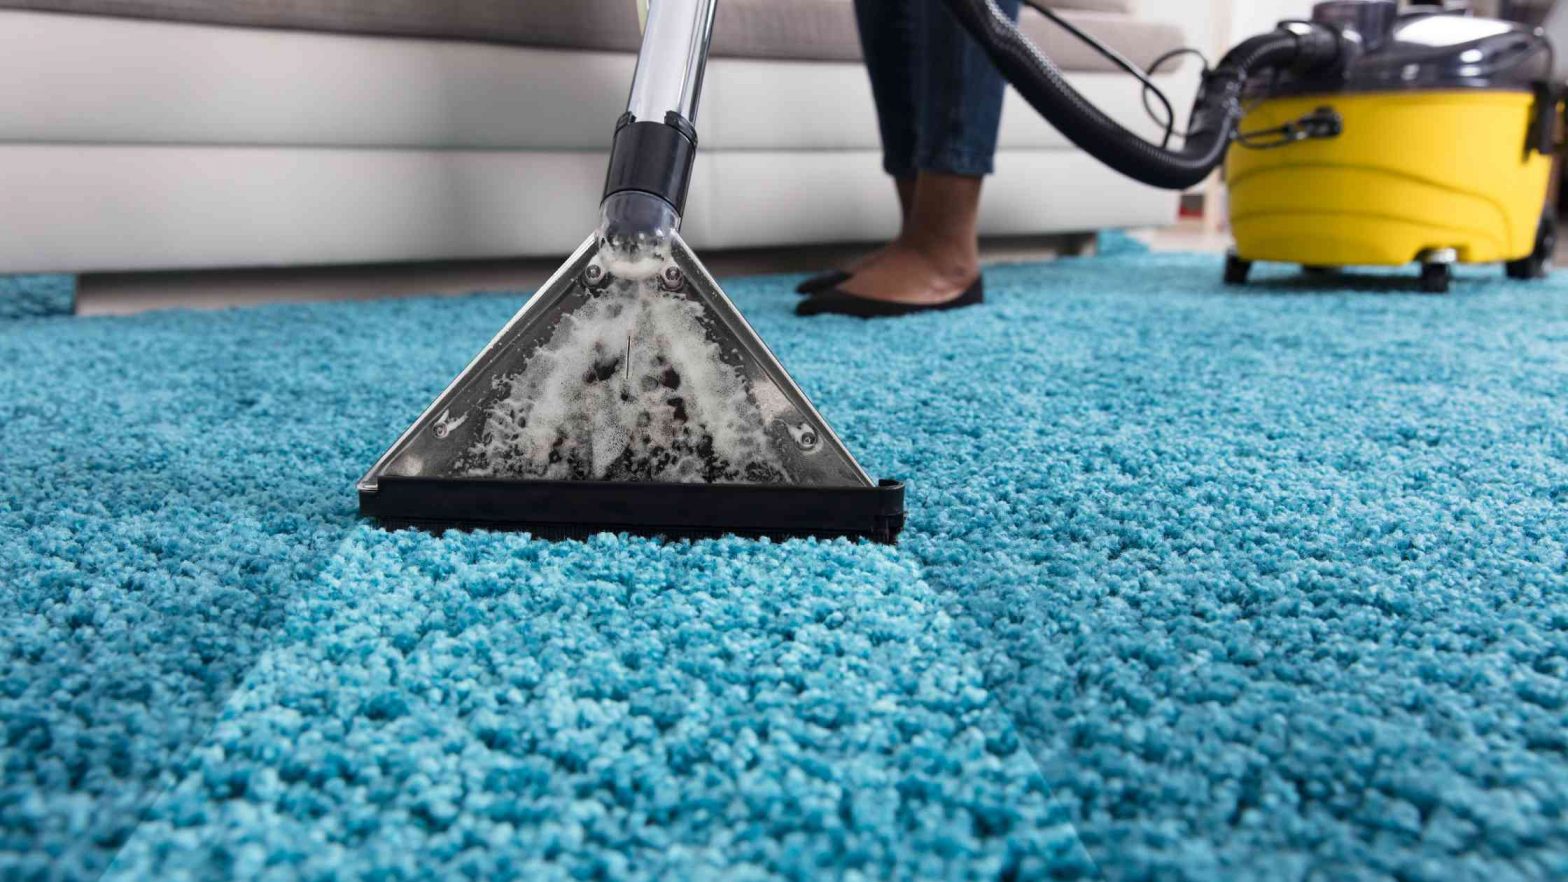 Why does my carpet odor even more after cleaning it